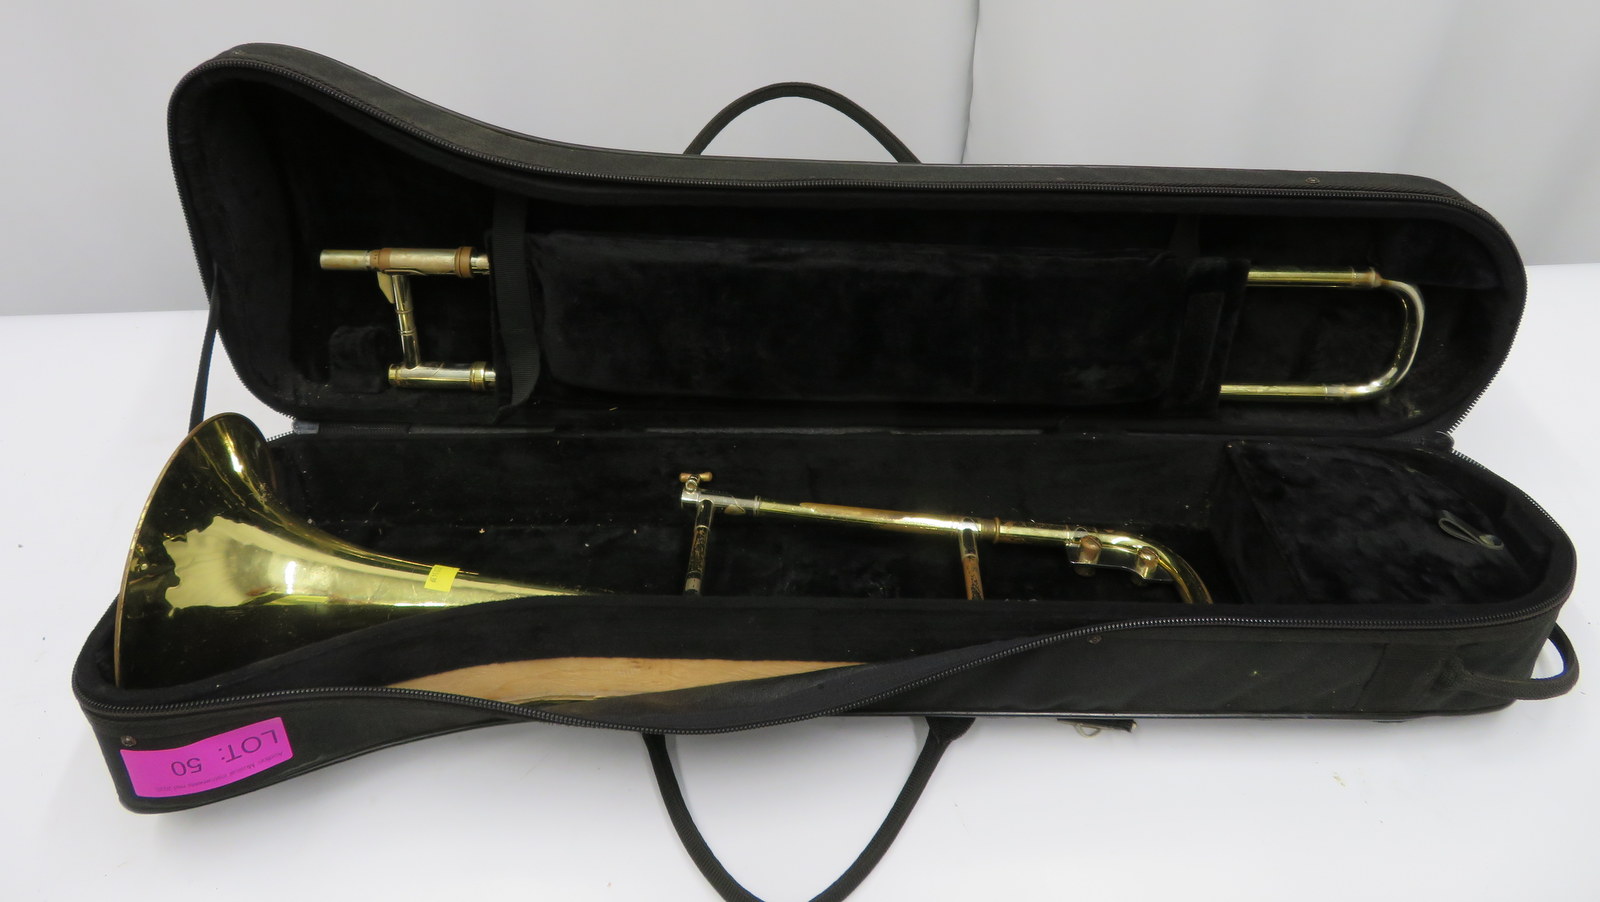 Rath R4 trombone with case. Serial number: R4144.